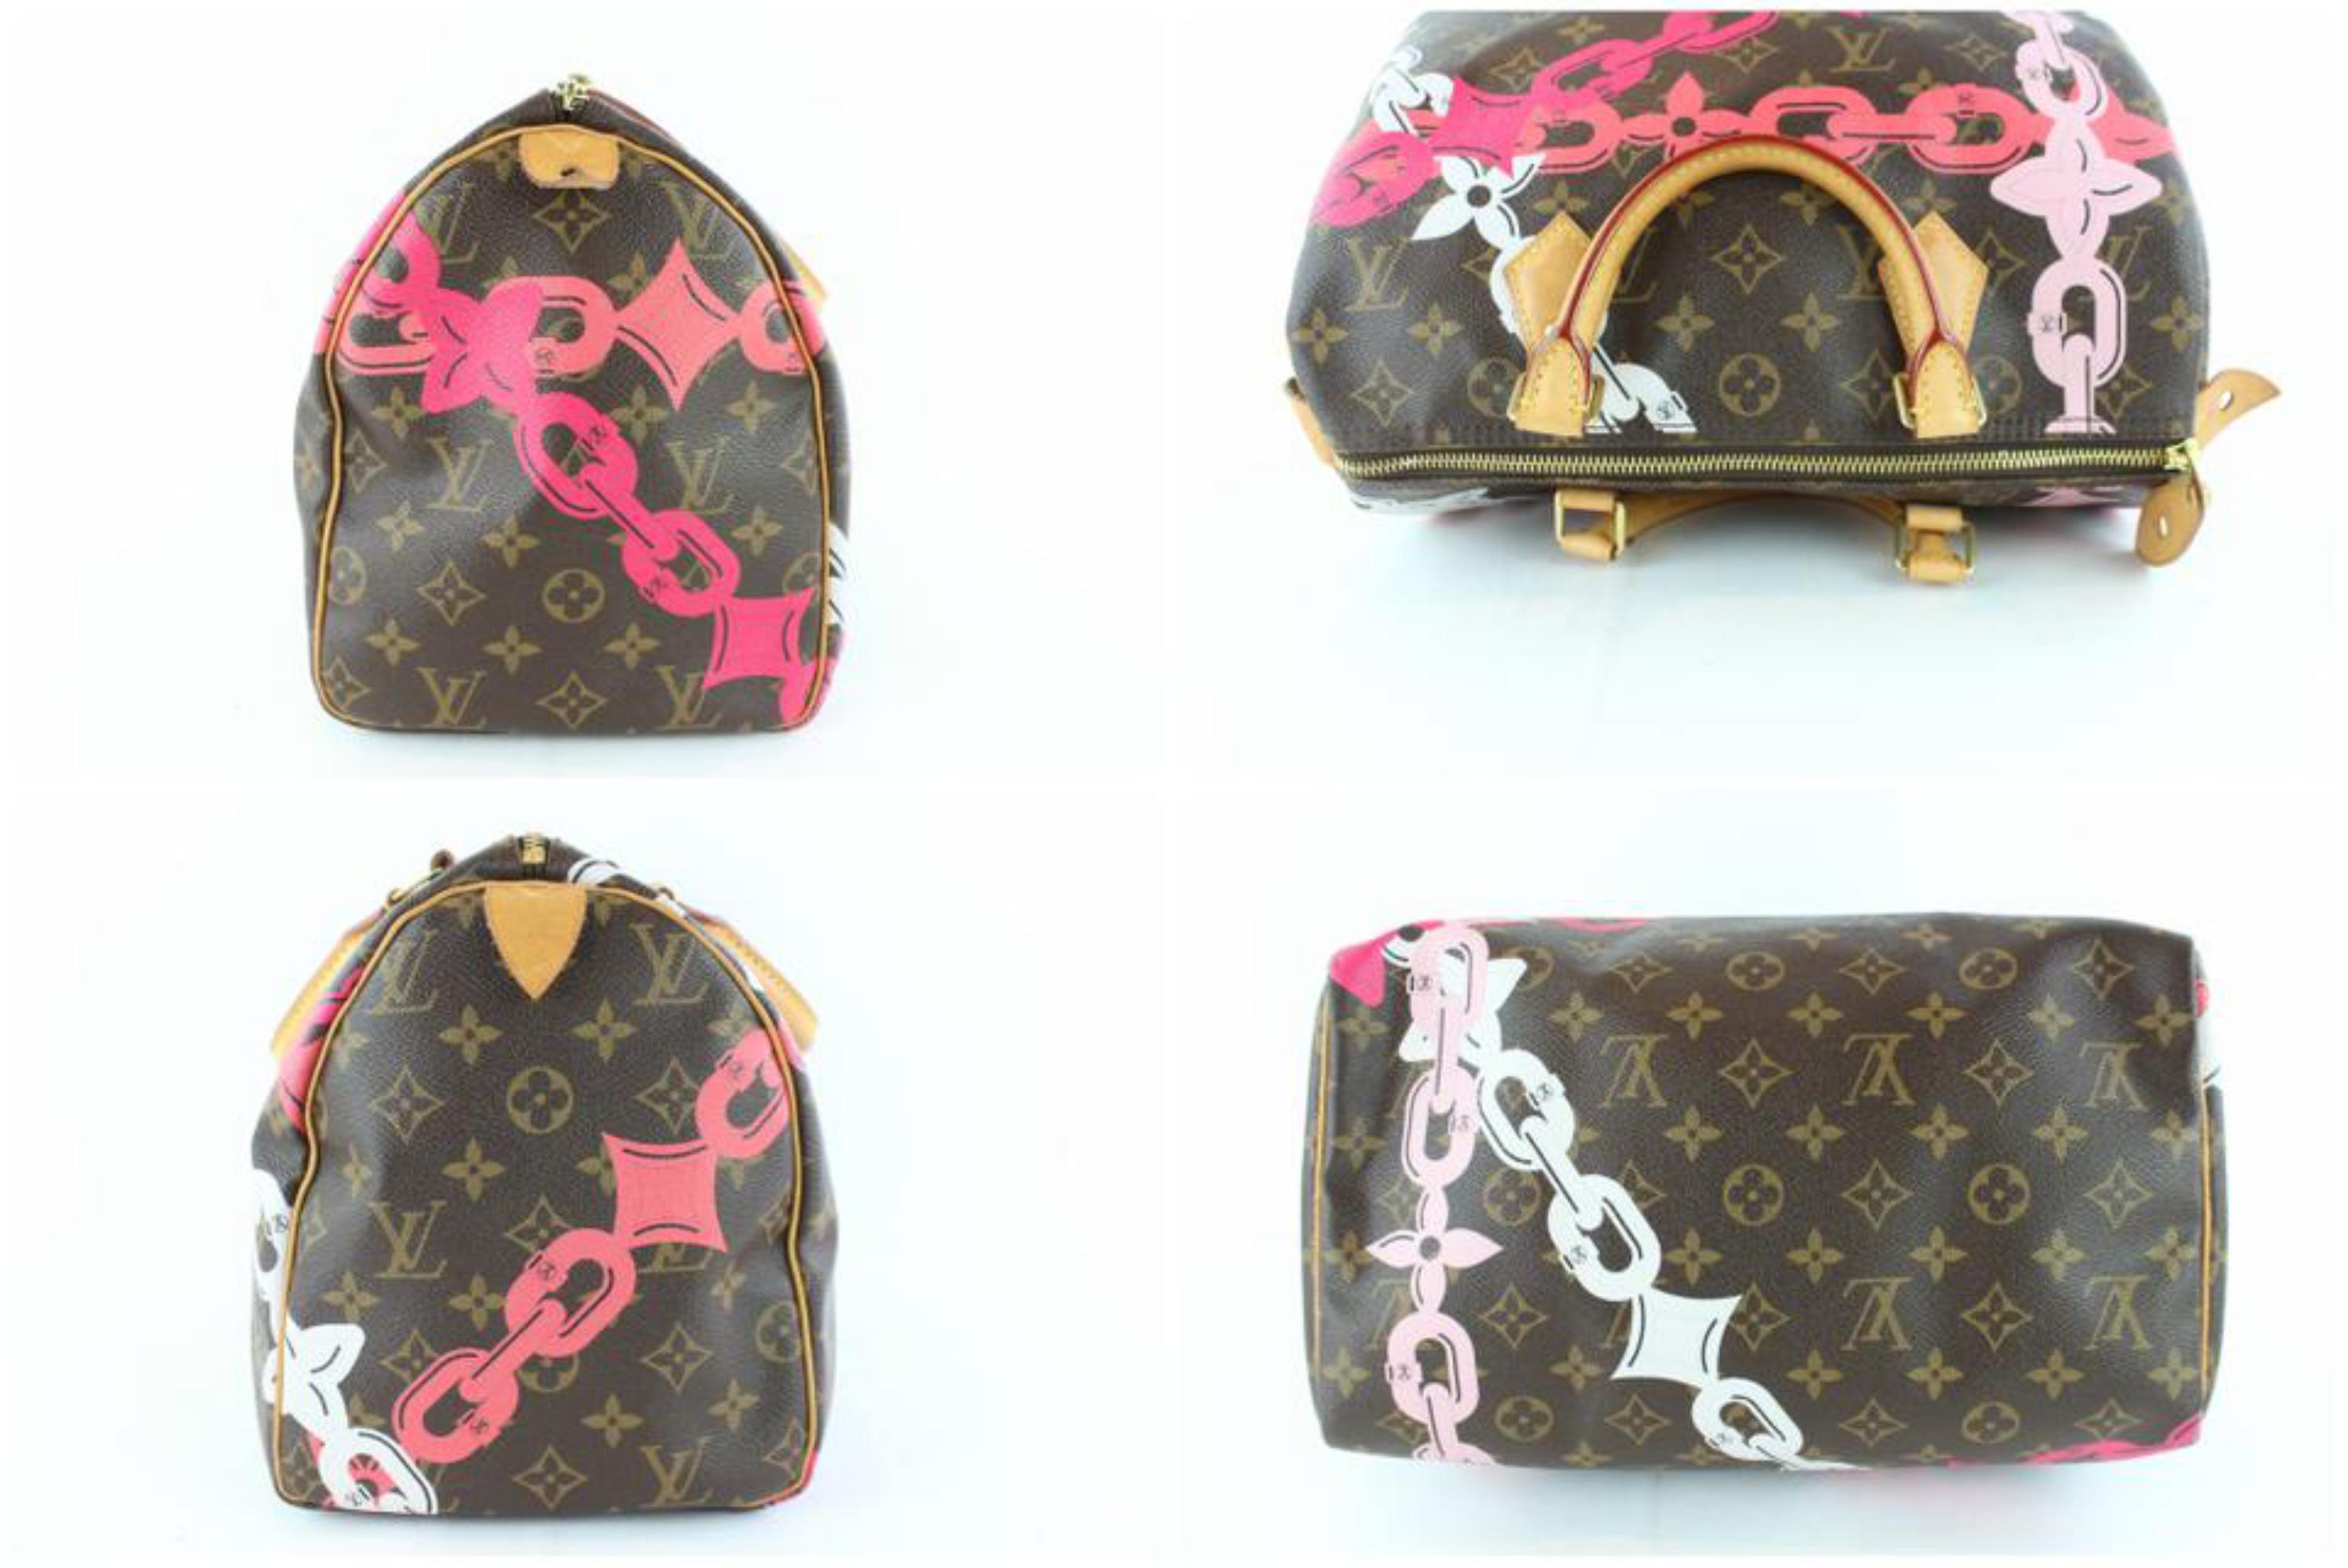 Louis Vuitton Speedy Limited Edition Chain Flower 30 22lz1129 Pink Satchel In Excellent Condition For Sale In Forest Hills, NY